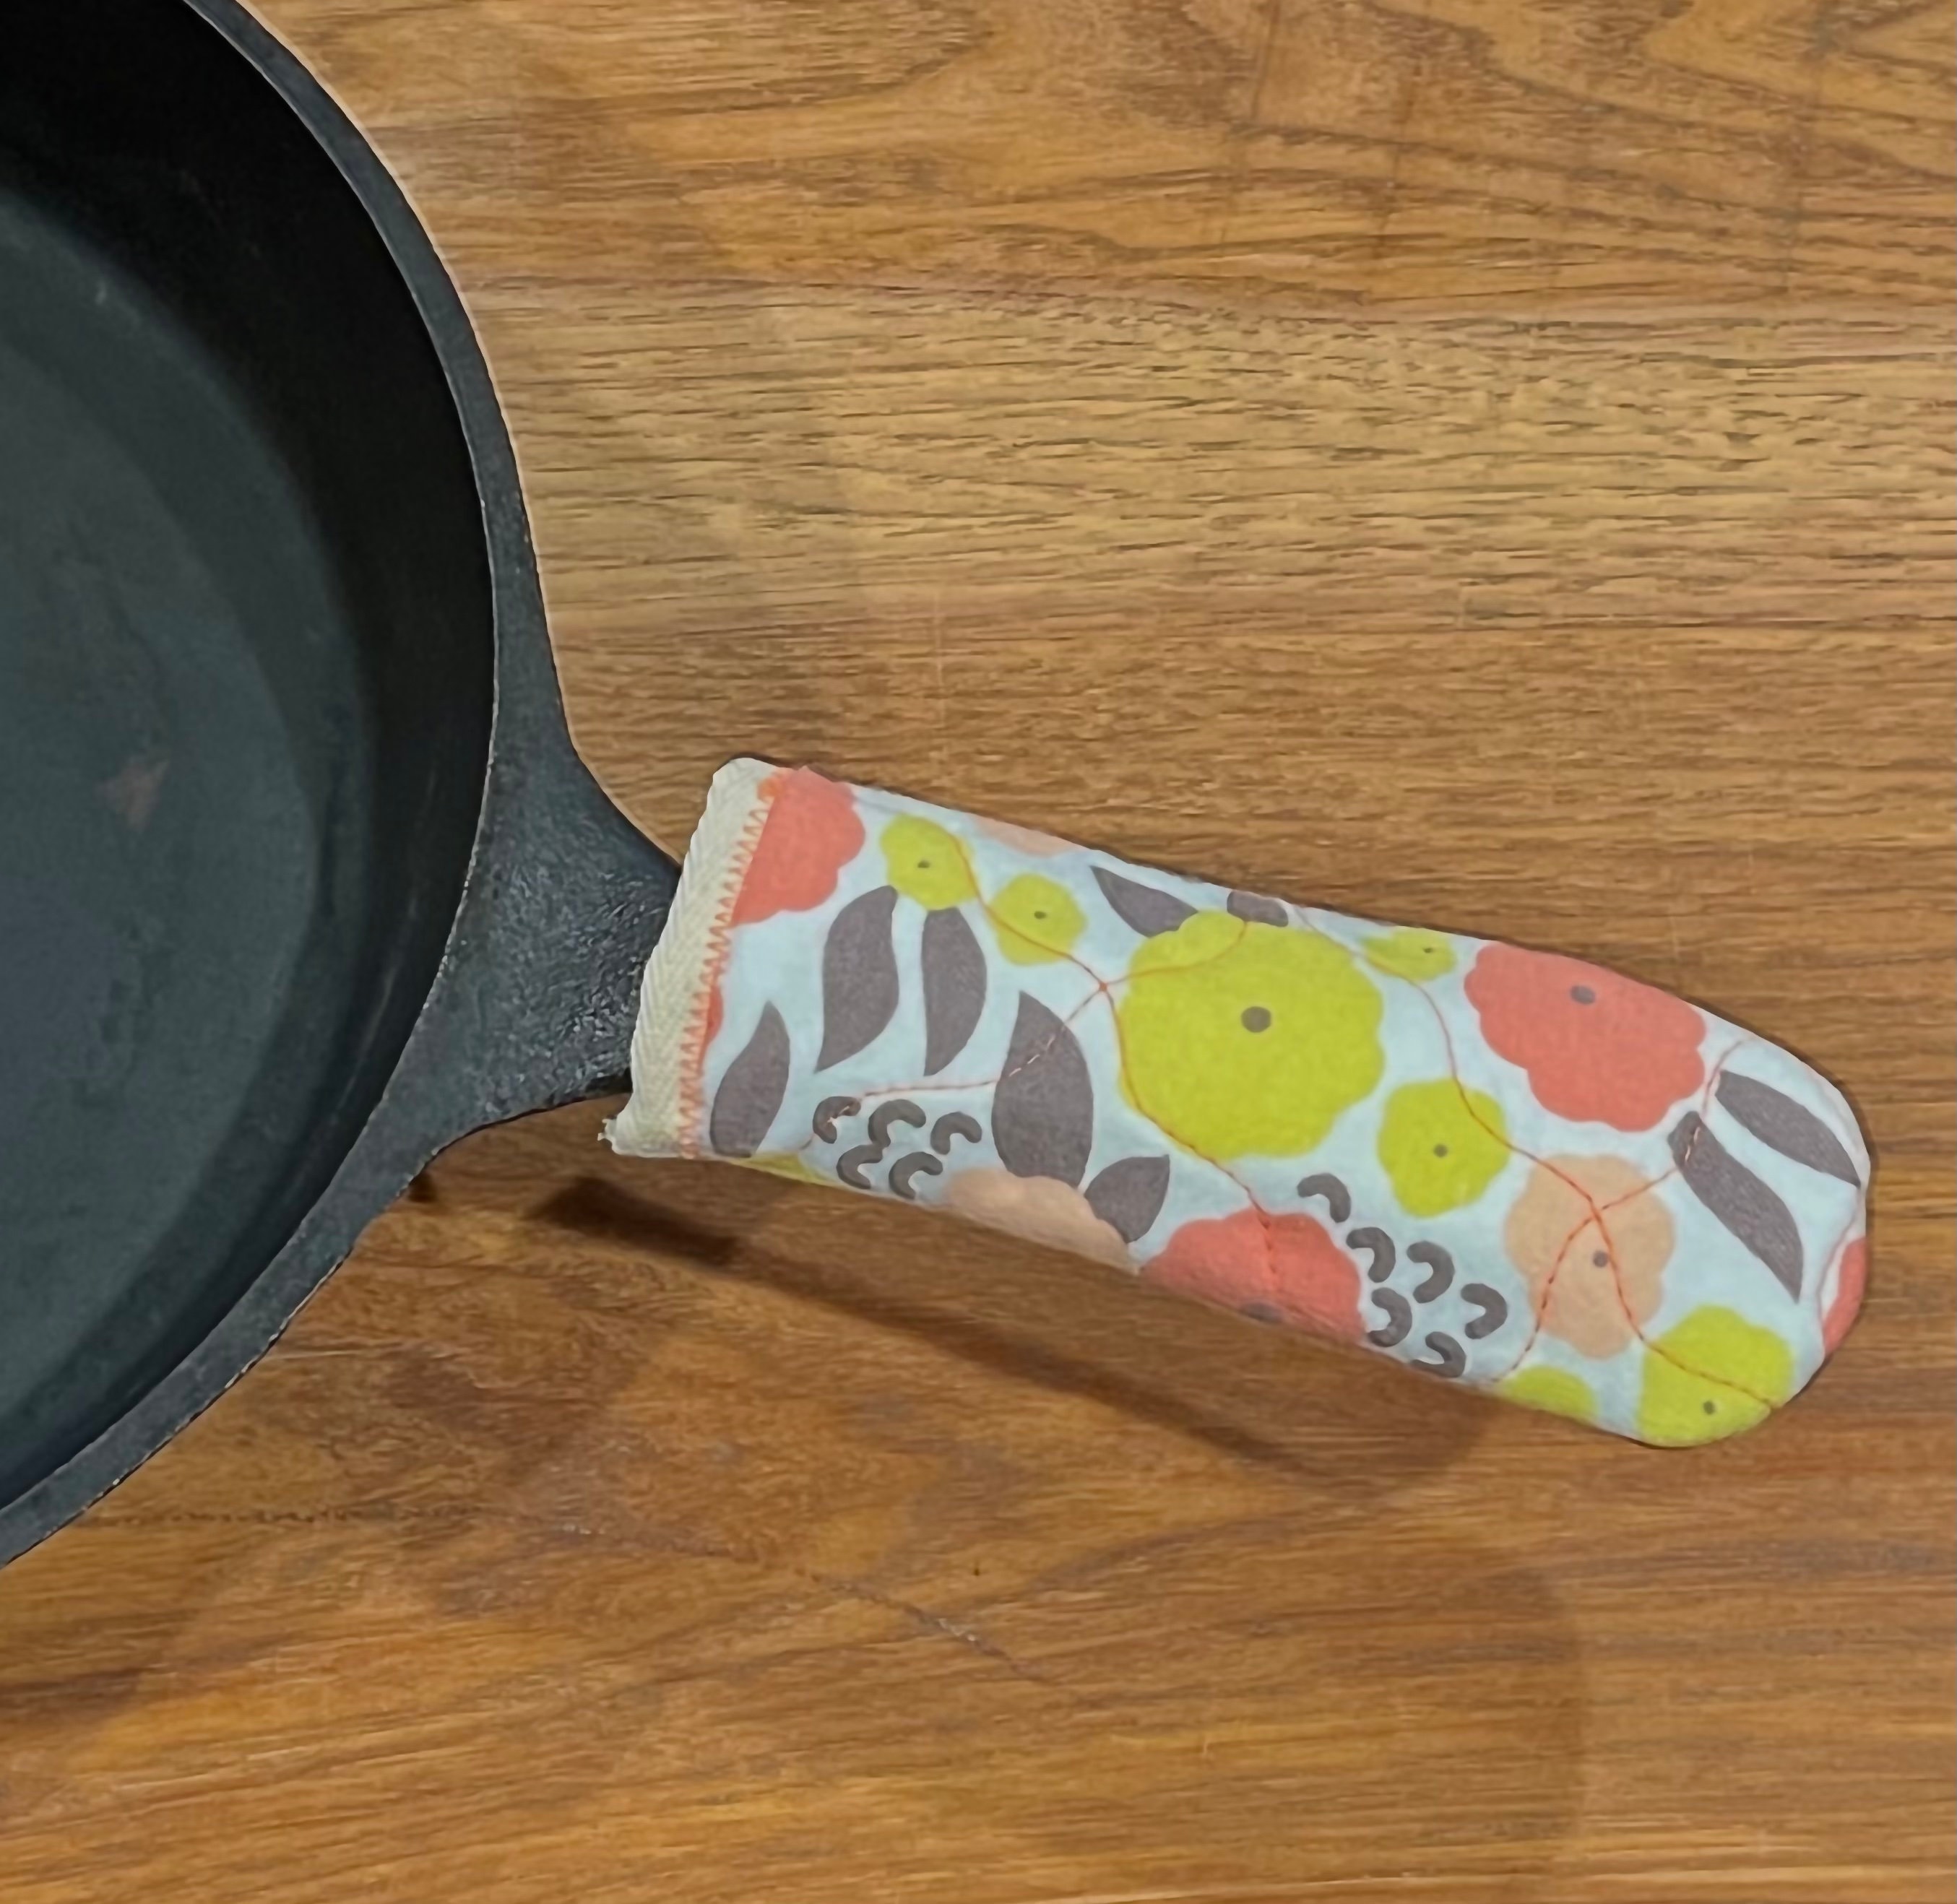 Skillet Handle Hot Pad with the Cricut Maker 